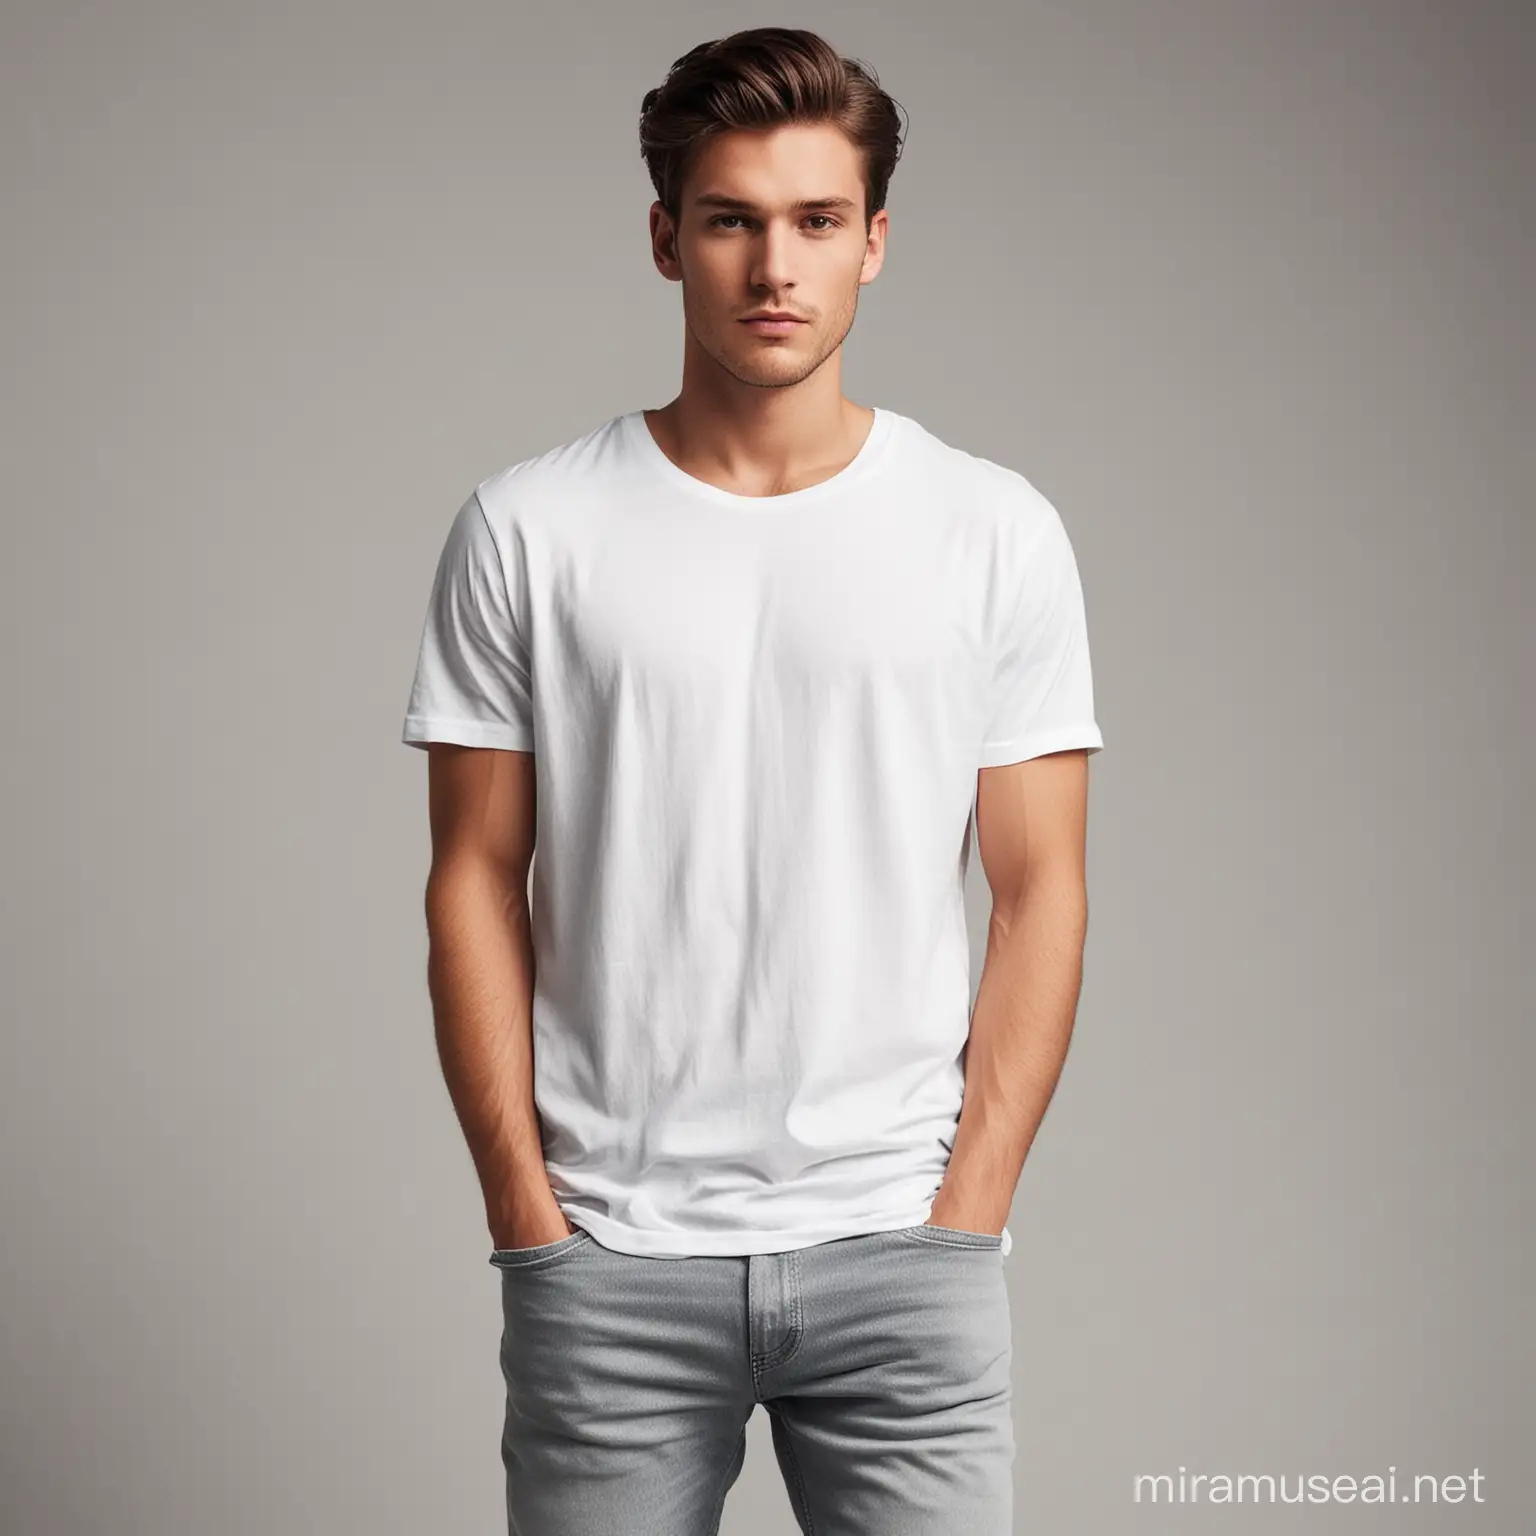 Entirely WhiteClad Male Model in Casual TShirt Pose